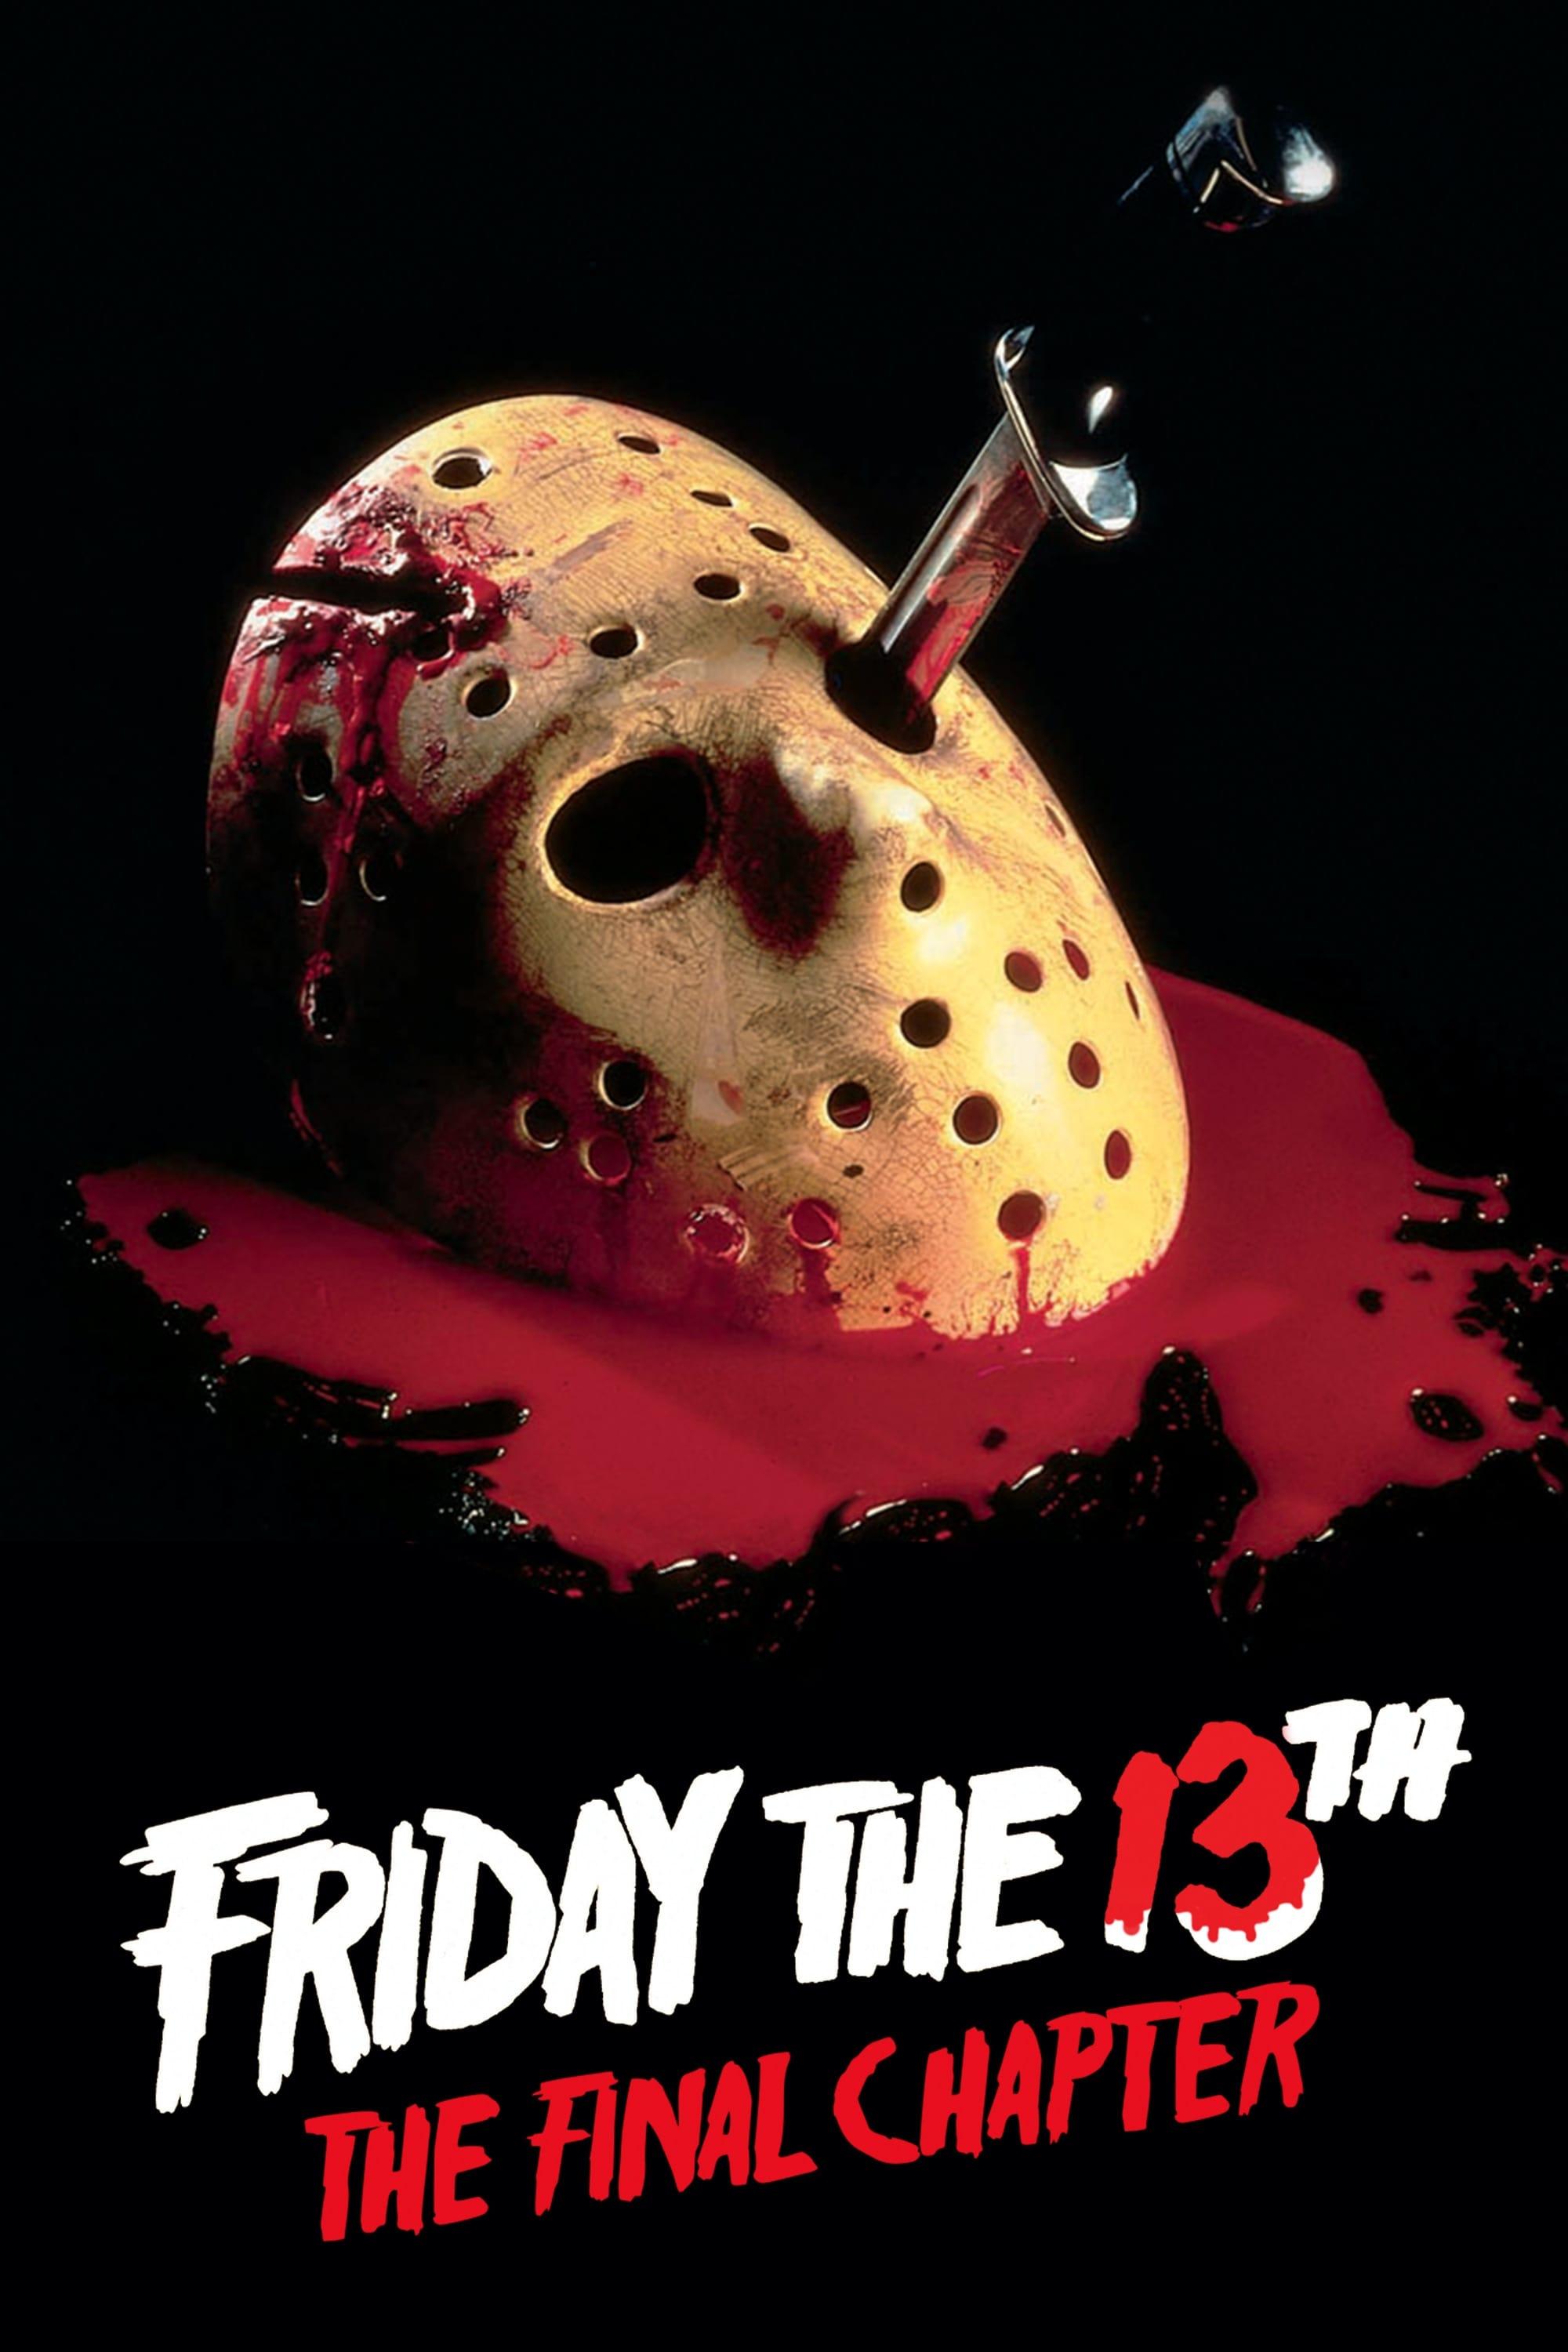 Friday the 13th: The Final Chapter poster